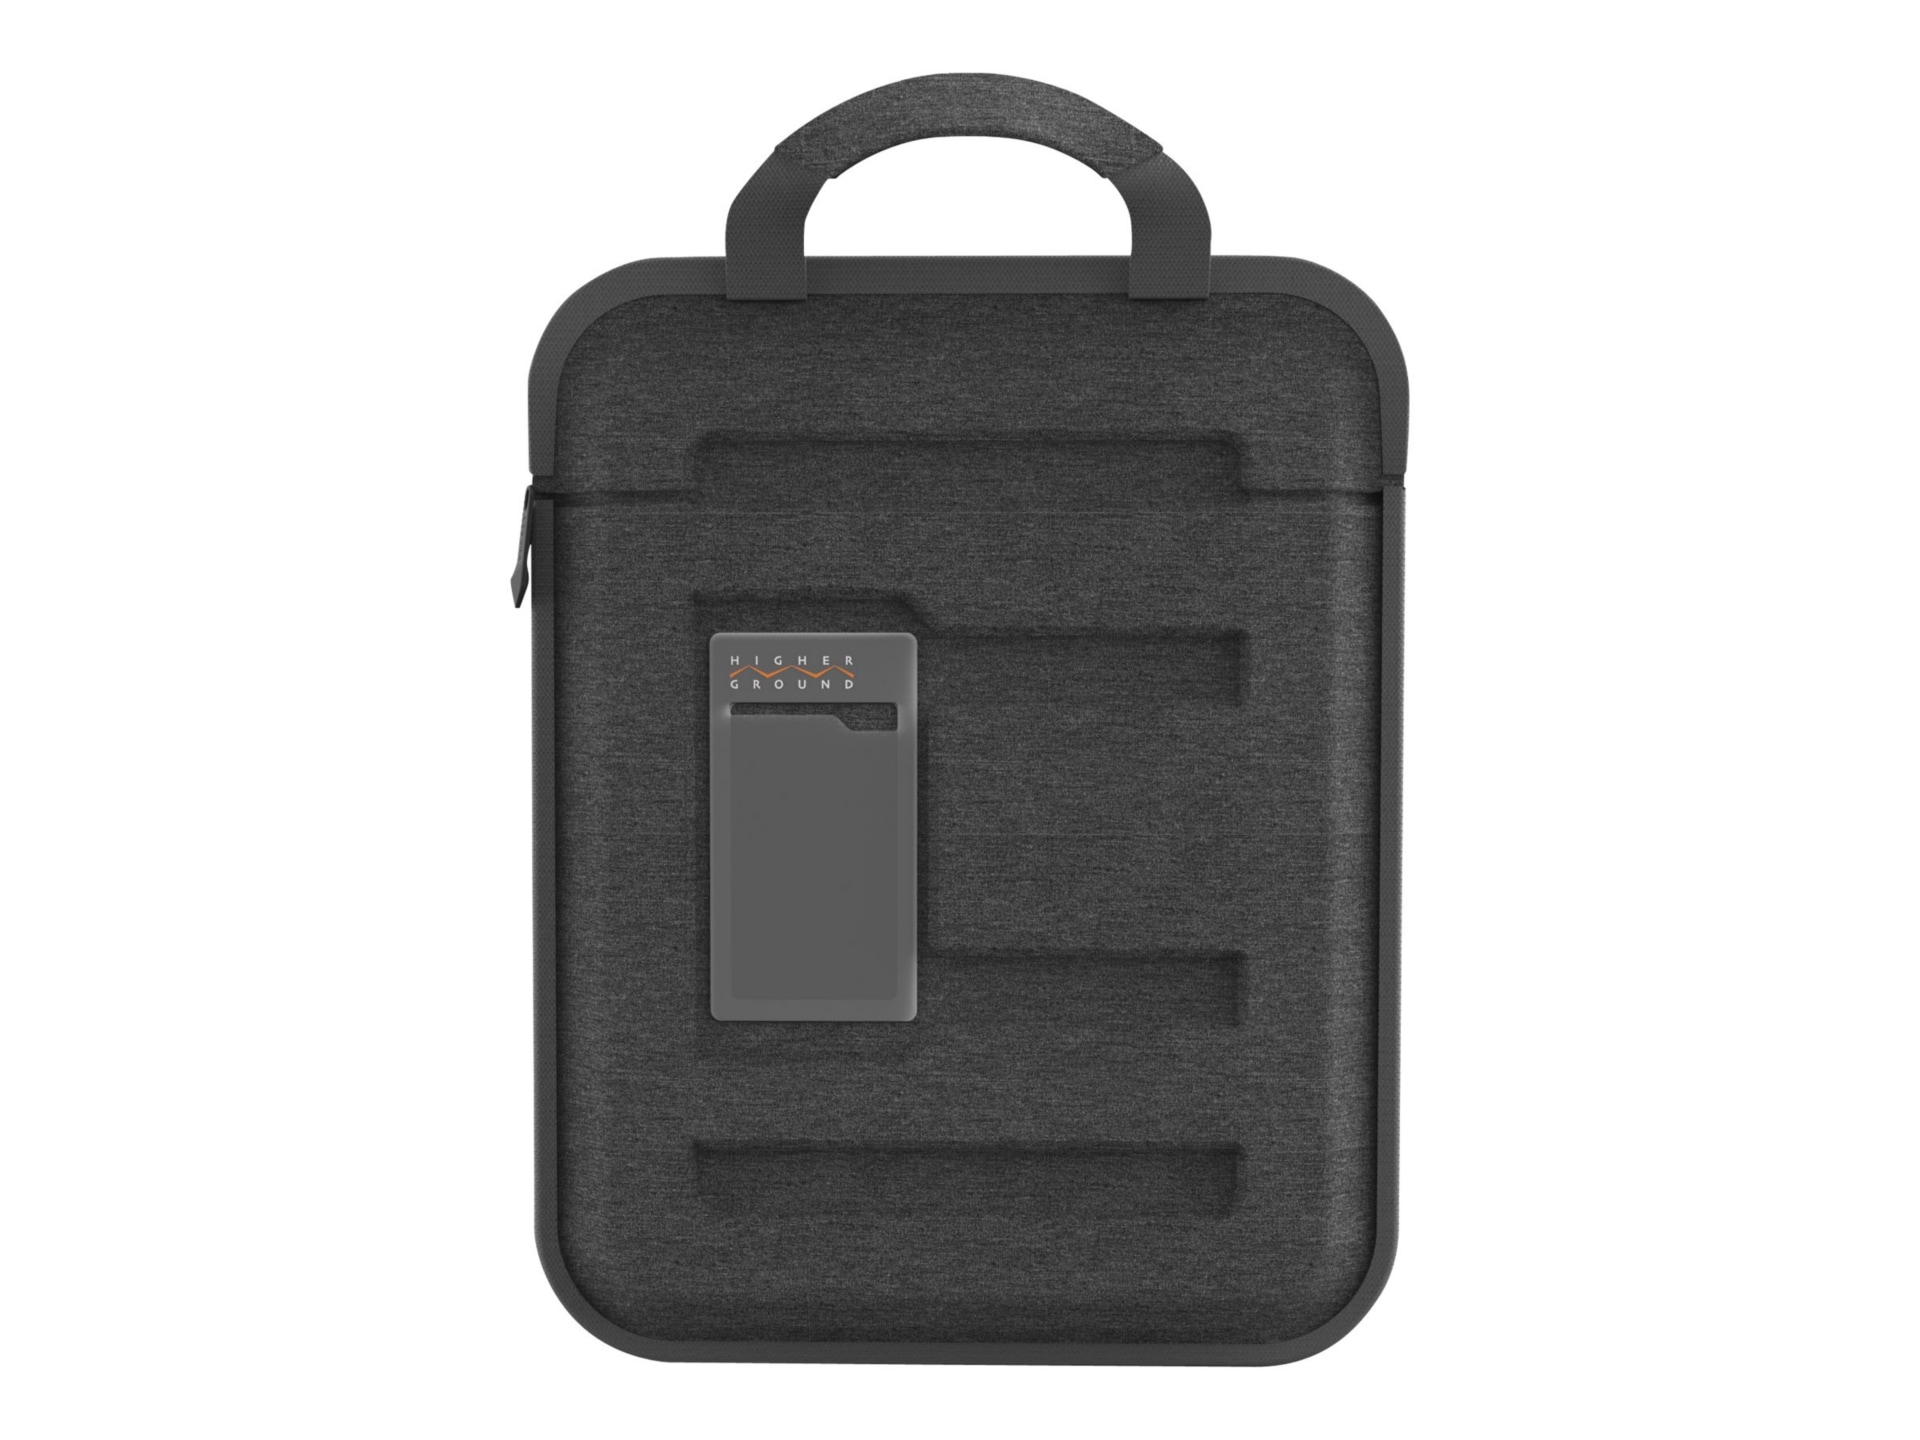 Higher Ground Capsule notebook carrying case